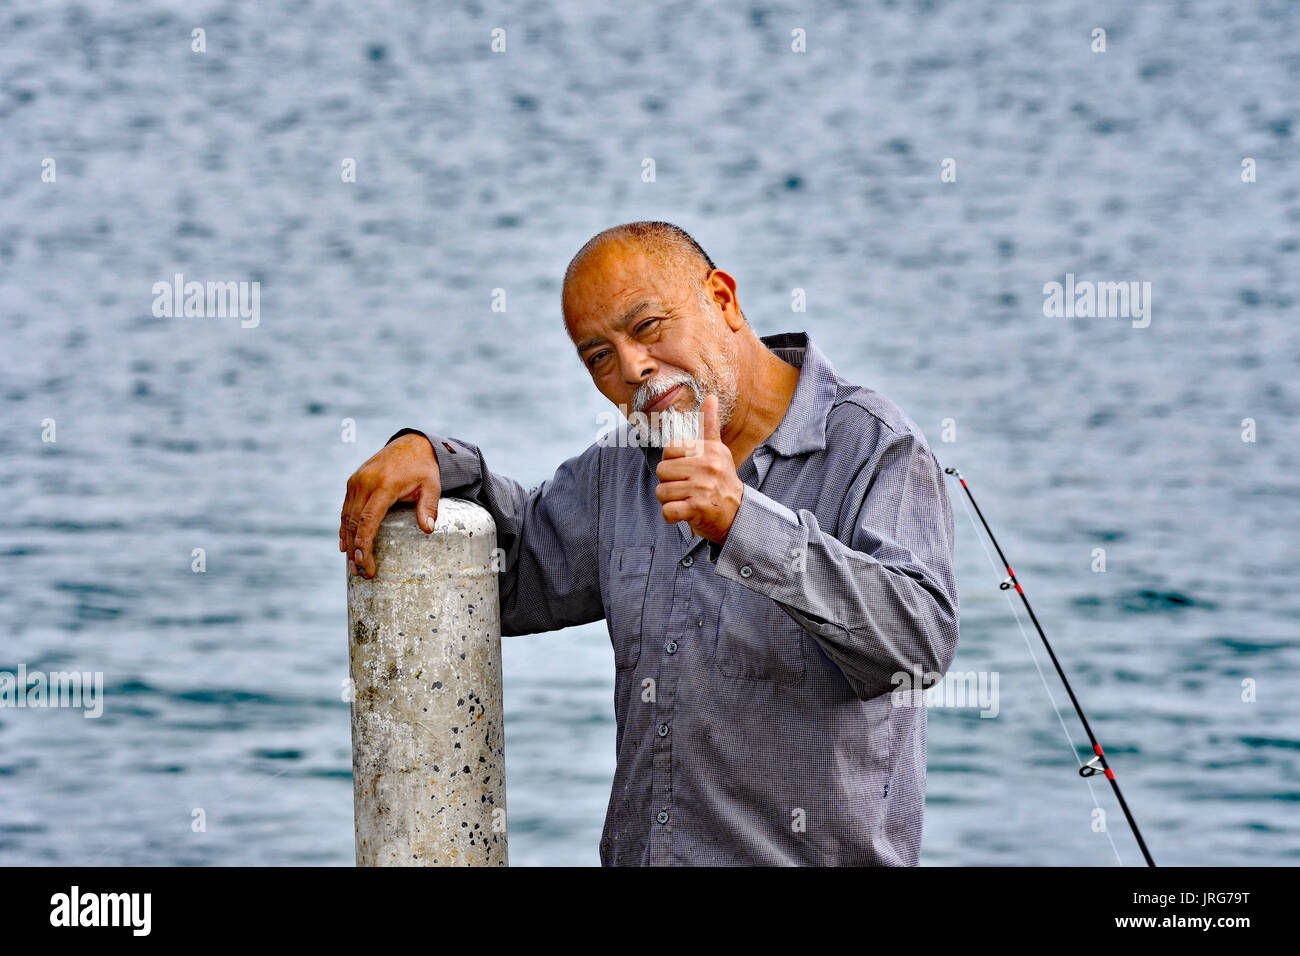 A fisherman posing with thumps up Stock Photo